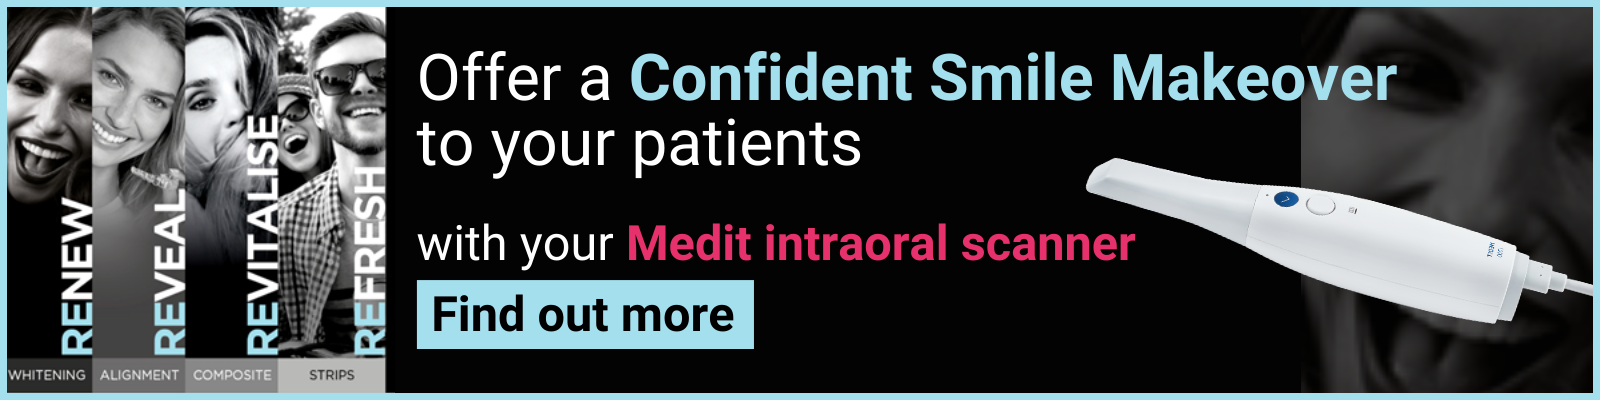 Offer a Confident Smile Makeover to your patients with your Medit intraoral scanner - Find out more